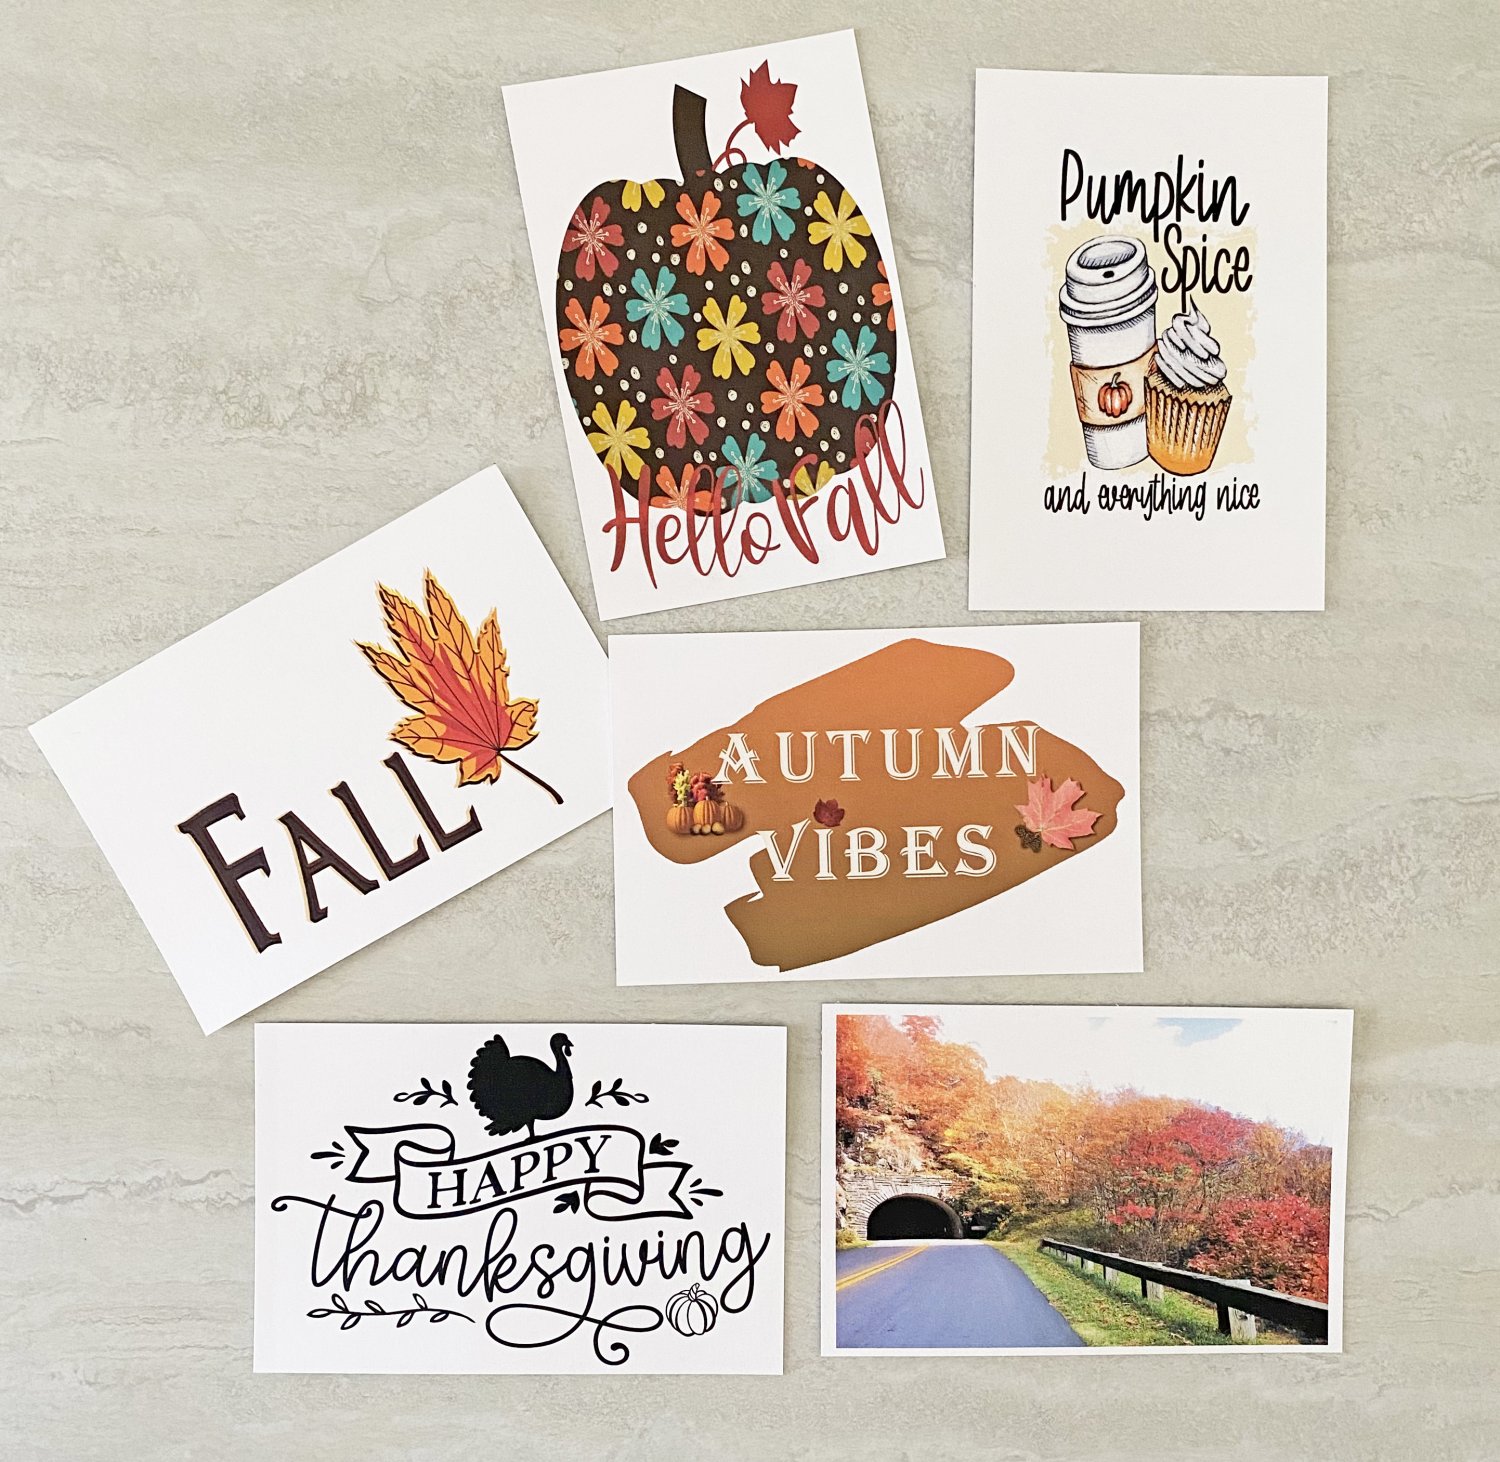 Fall and Happy Thanksgiving Turkey Banner Greeting Stationery Postcards 6 Piece Set